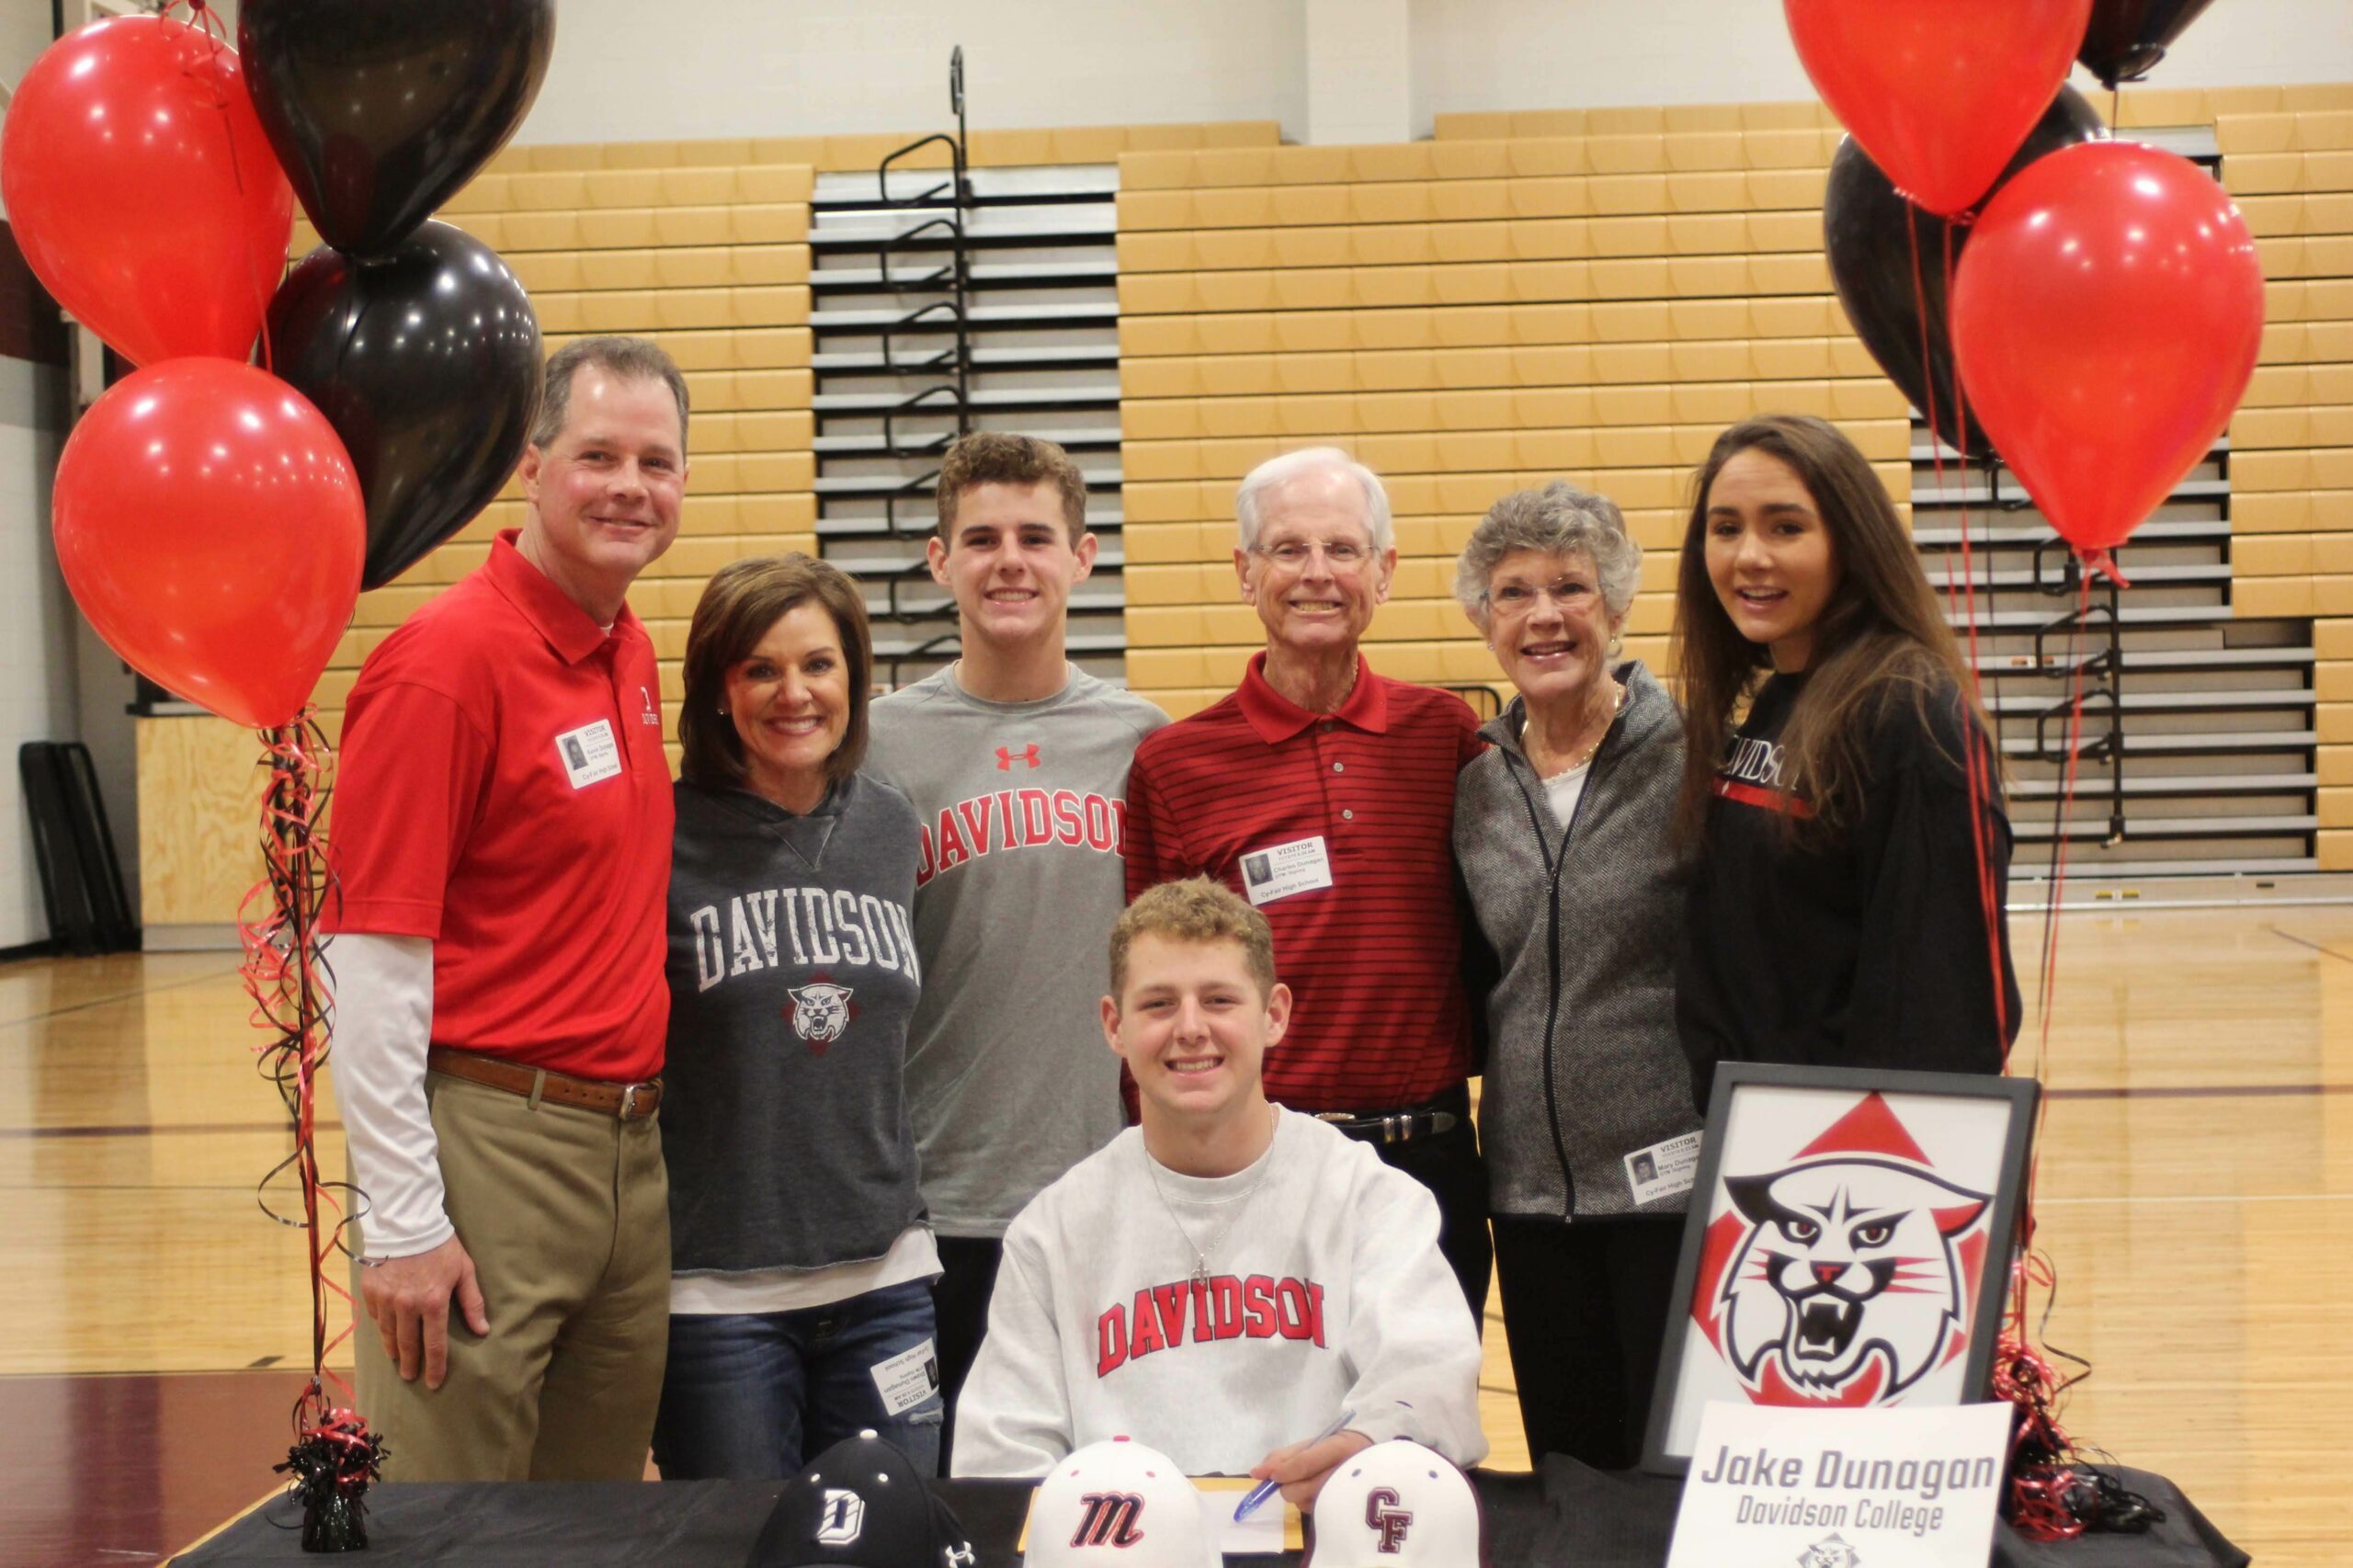 Jake Dunagan – Committed to Davidson College Q&A